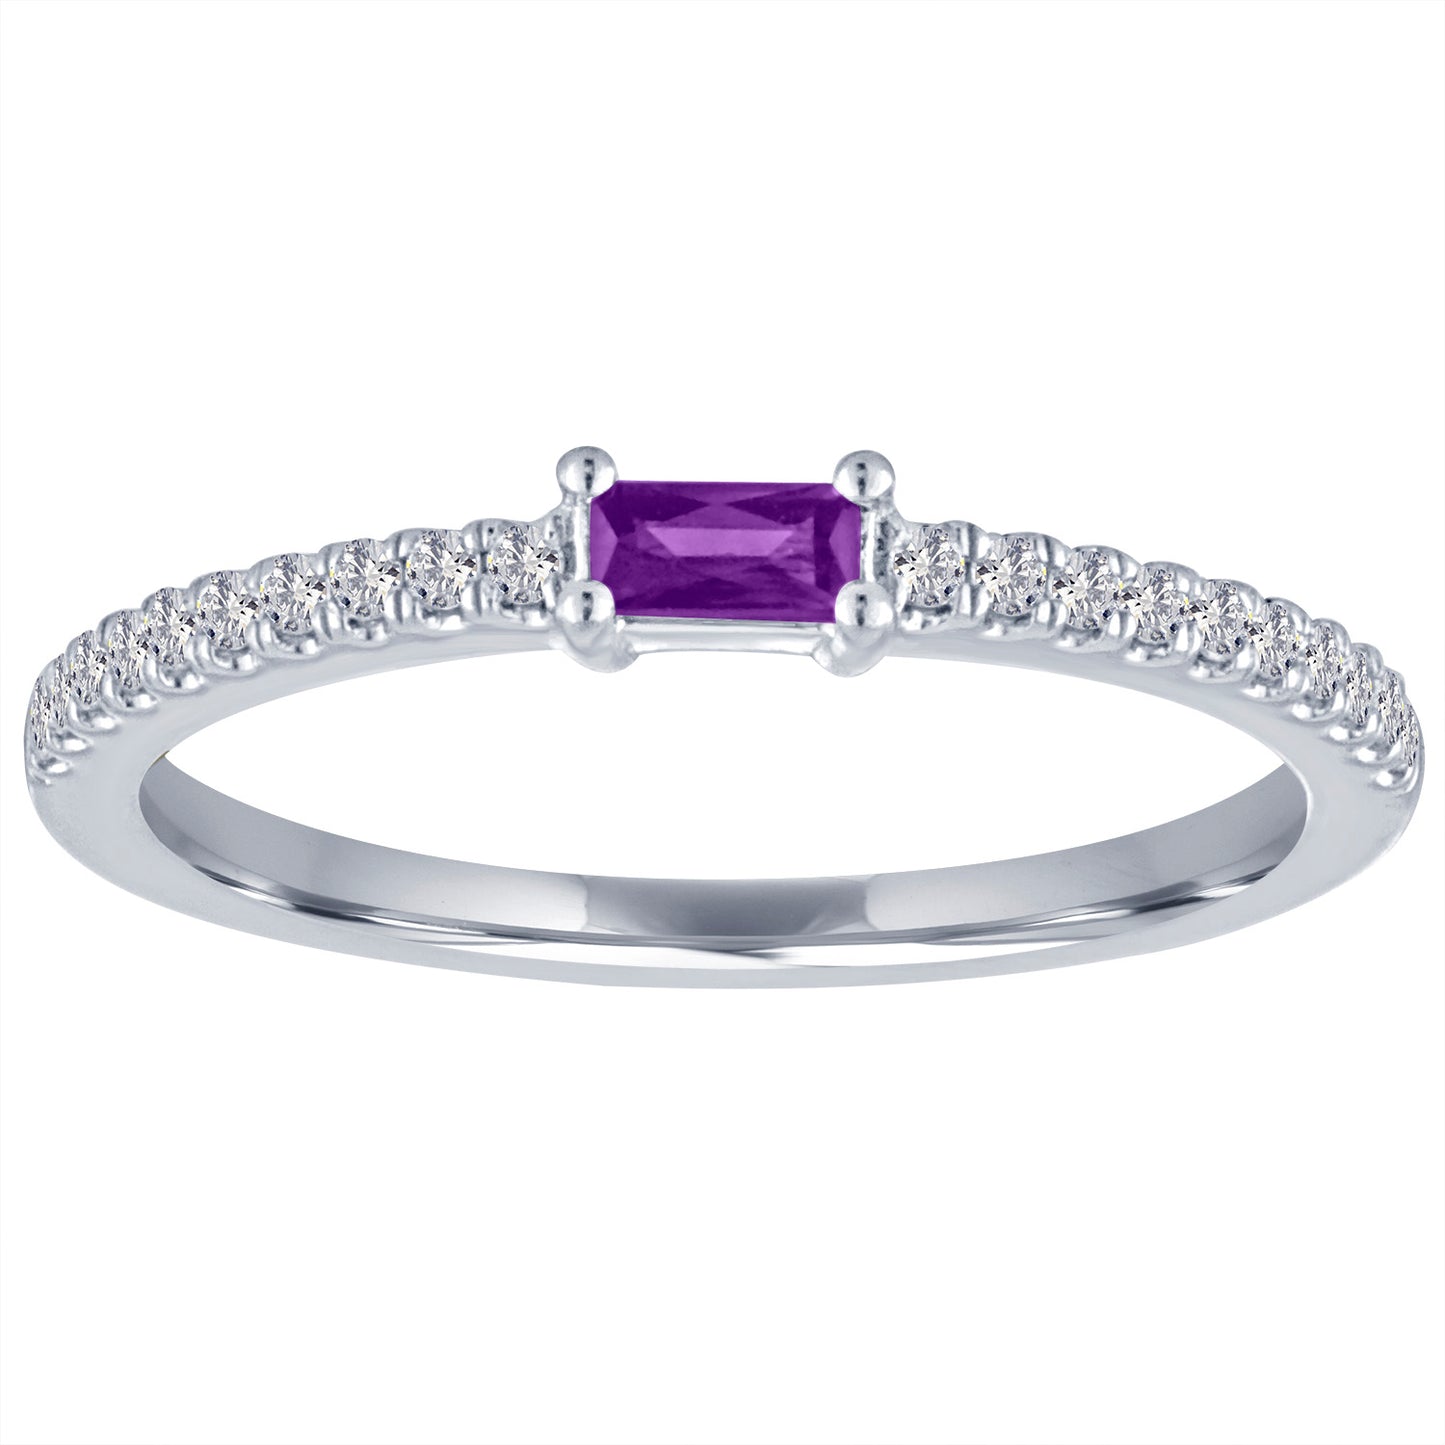 White gold skinny band with an amethyst baguette in the center and round diamonds on the shank.